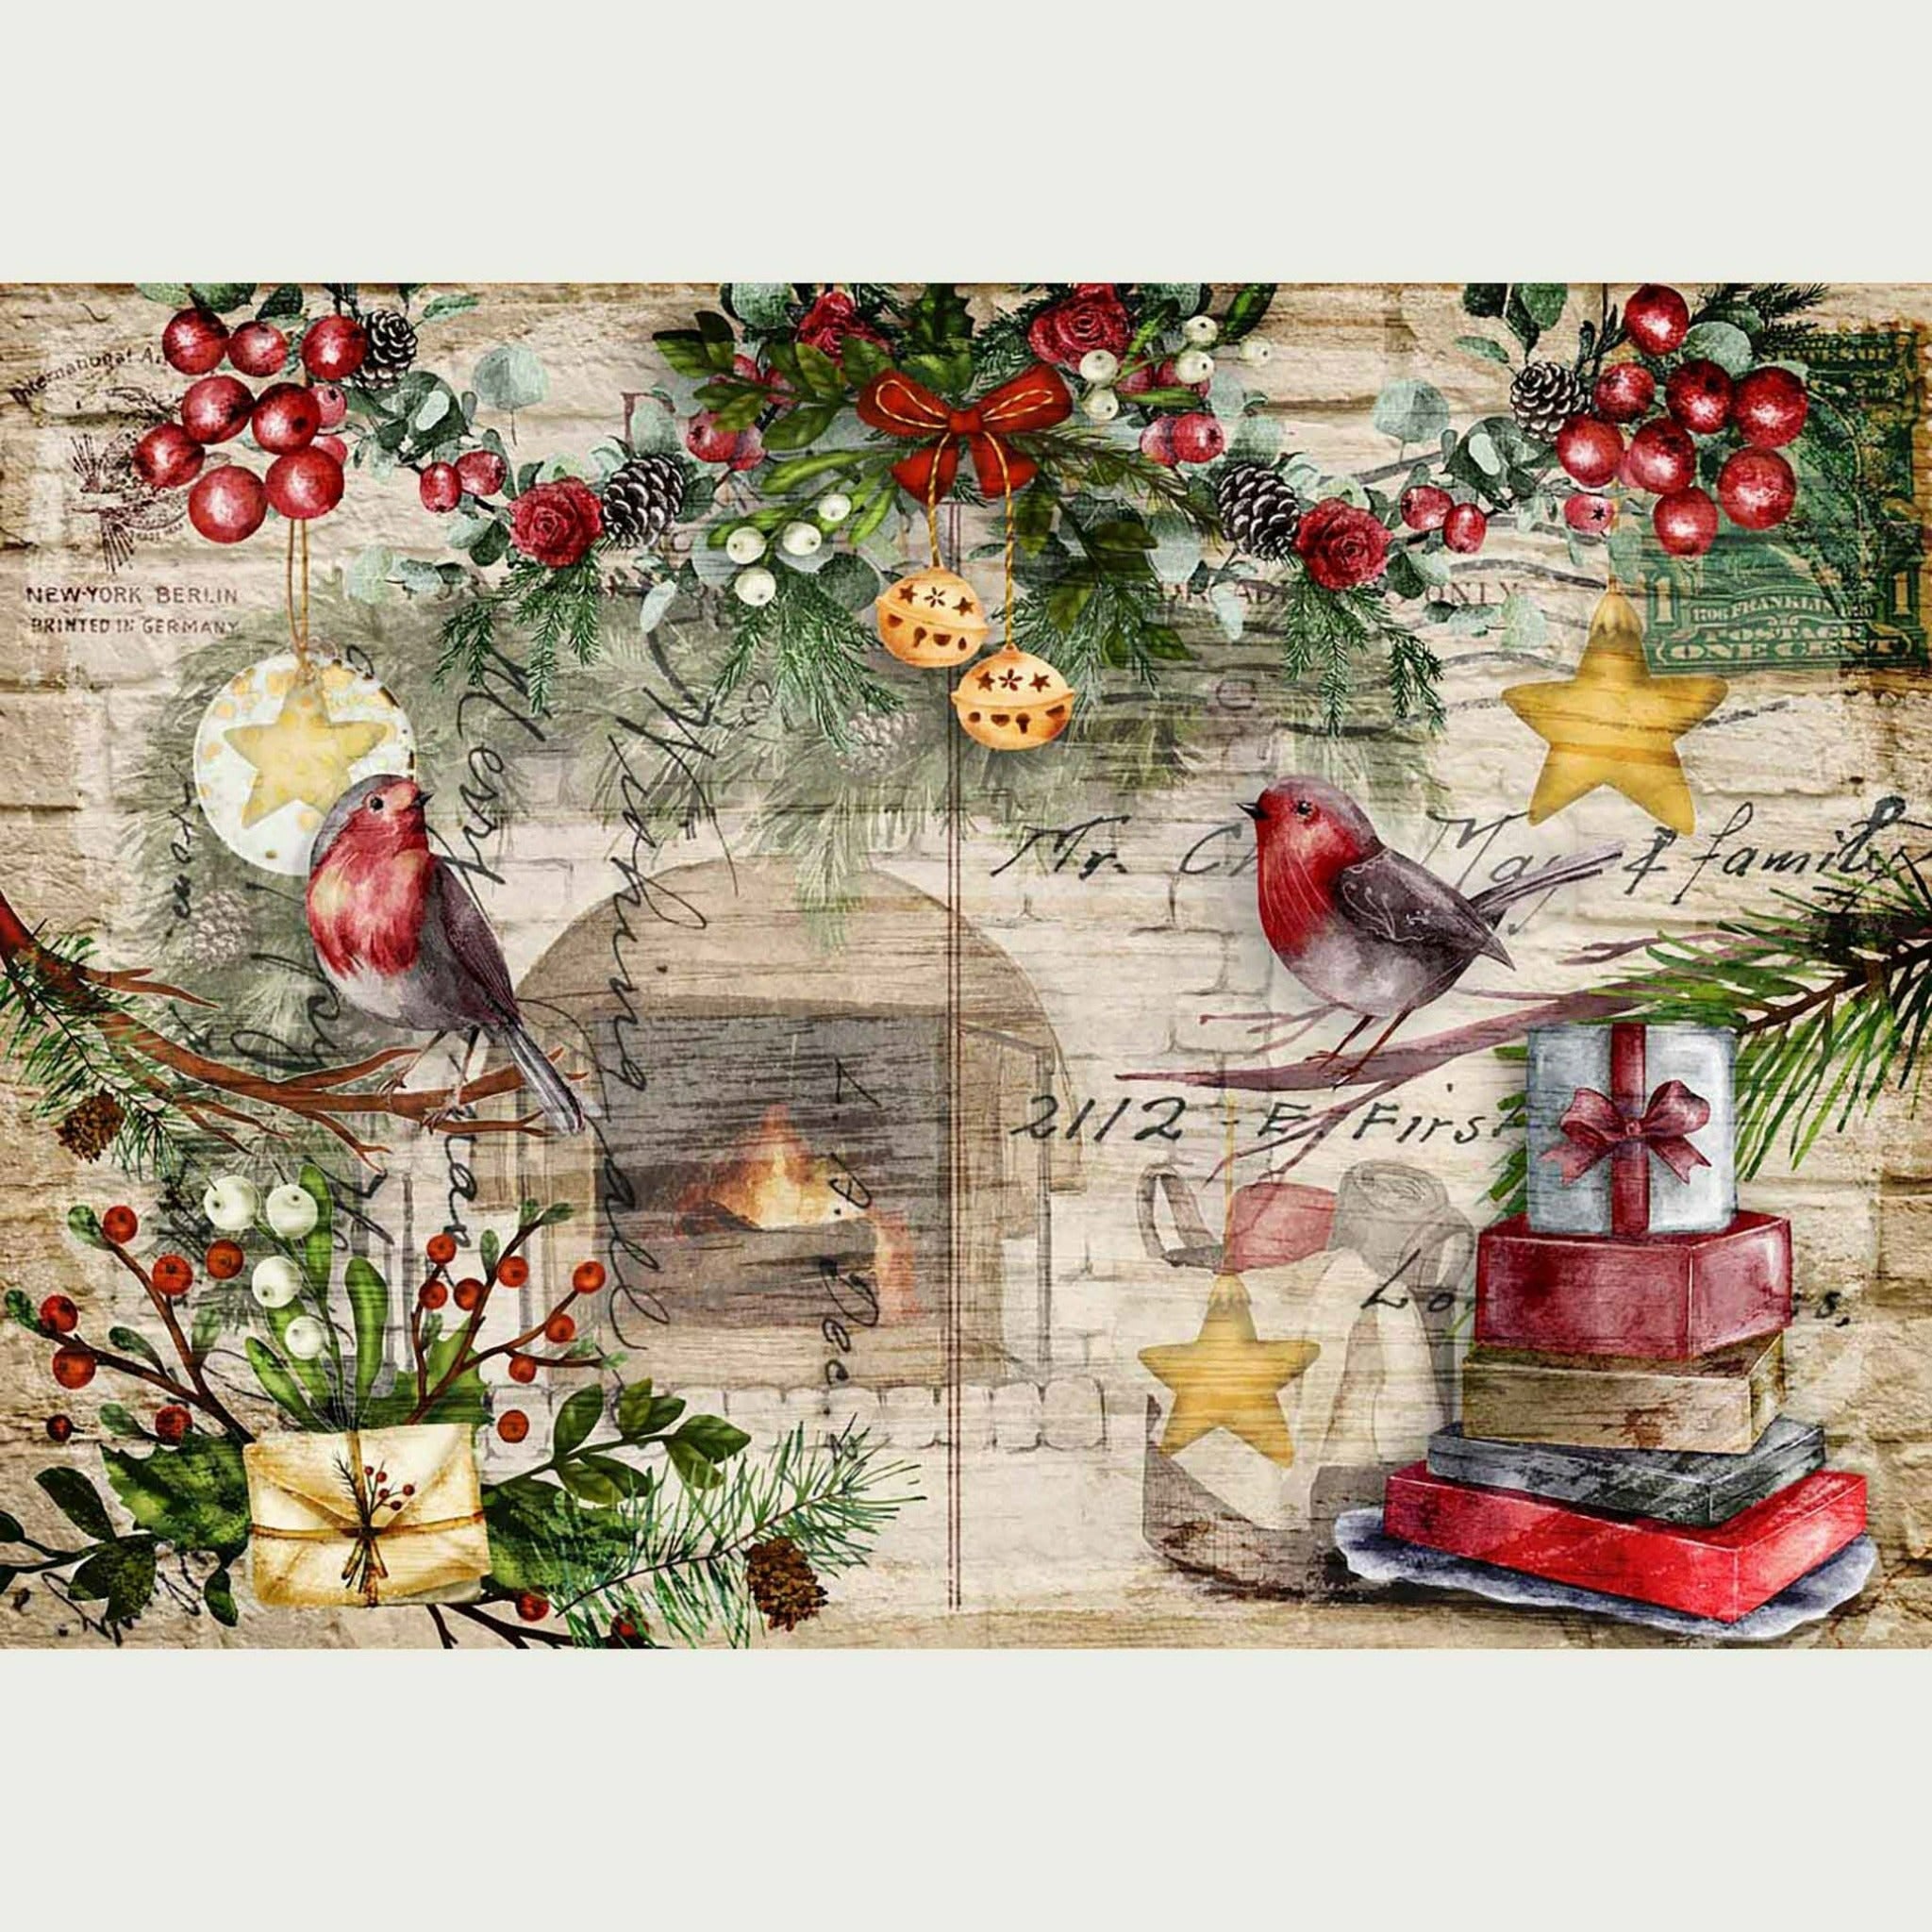 A2 rice paper design that features red robins and holiday garland against a faded background of a white brick-lined fireplace. White borders are on the top and bottom.